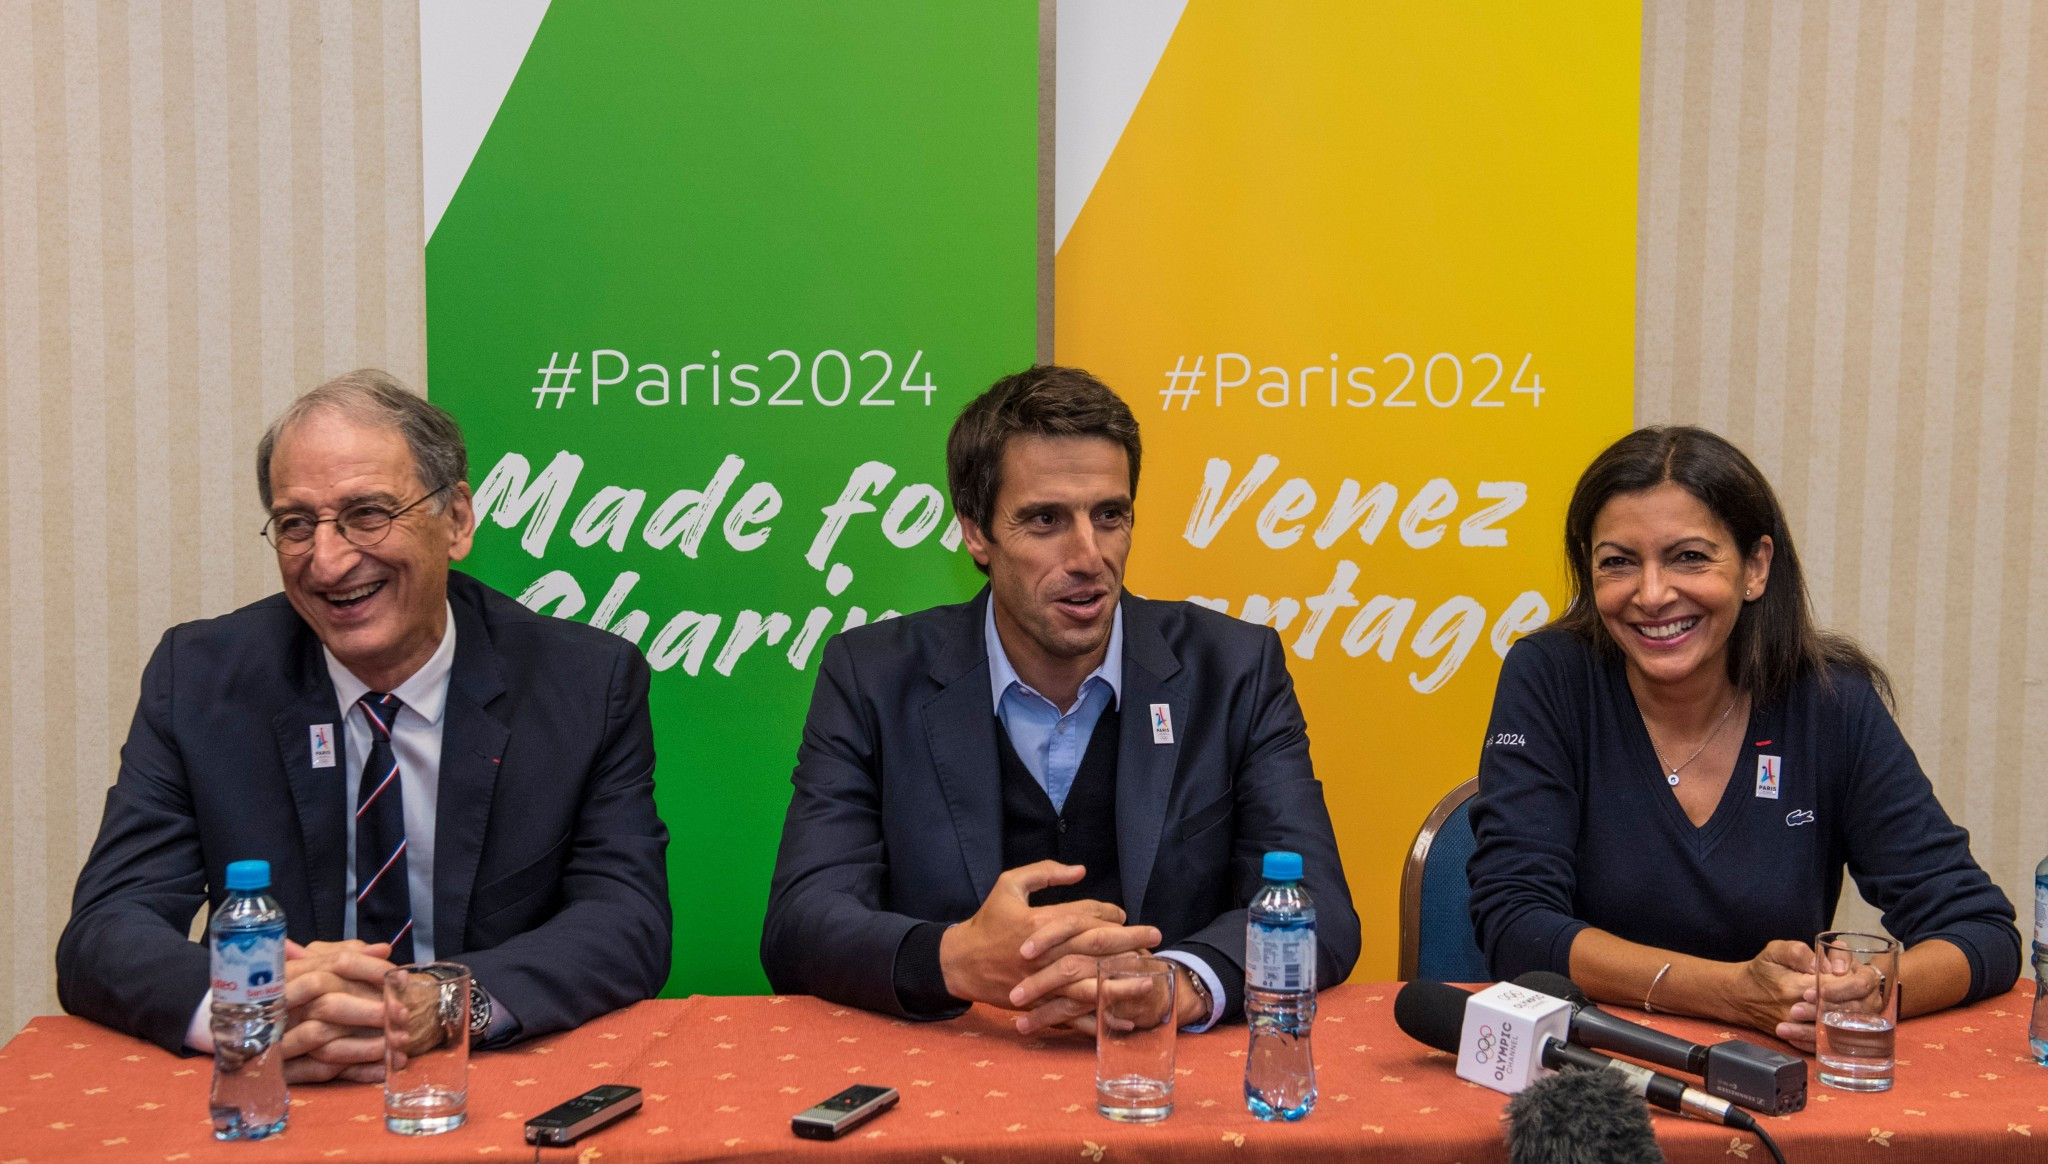 Anne Hidalgo, right, co-chair Tony Estanguet, centre, and French National Olympic and Sports Committee head Denis Masseglia all spoke today as Paris prepares to be officially awarded the 2024 Olympic and Paralympics ©Getty Images